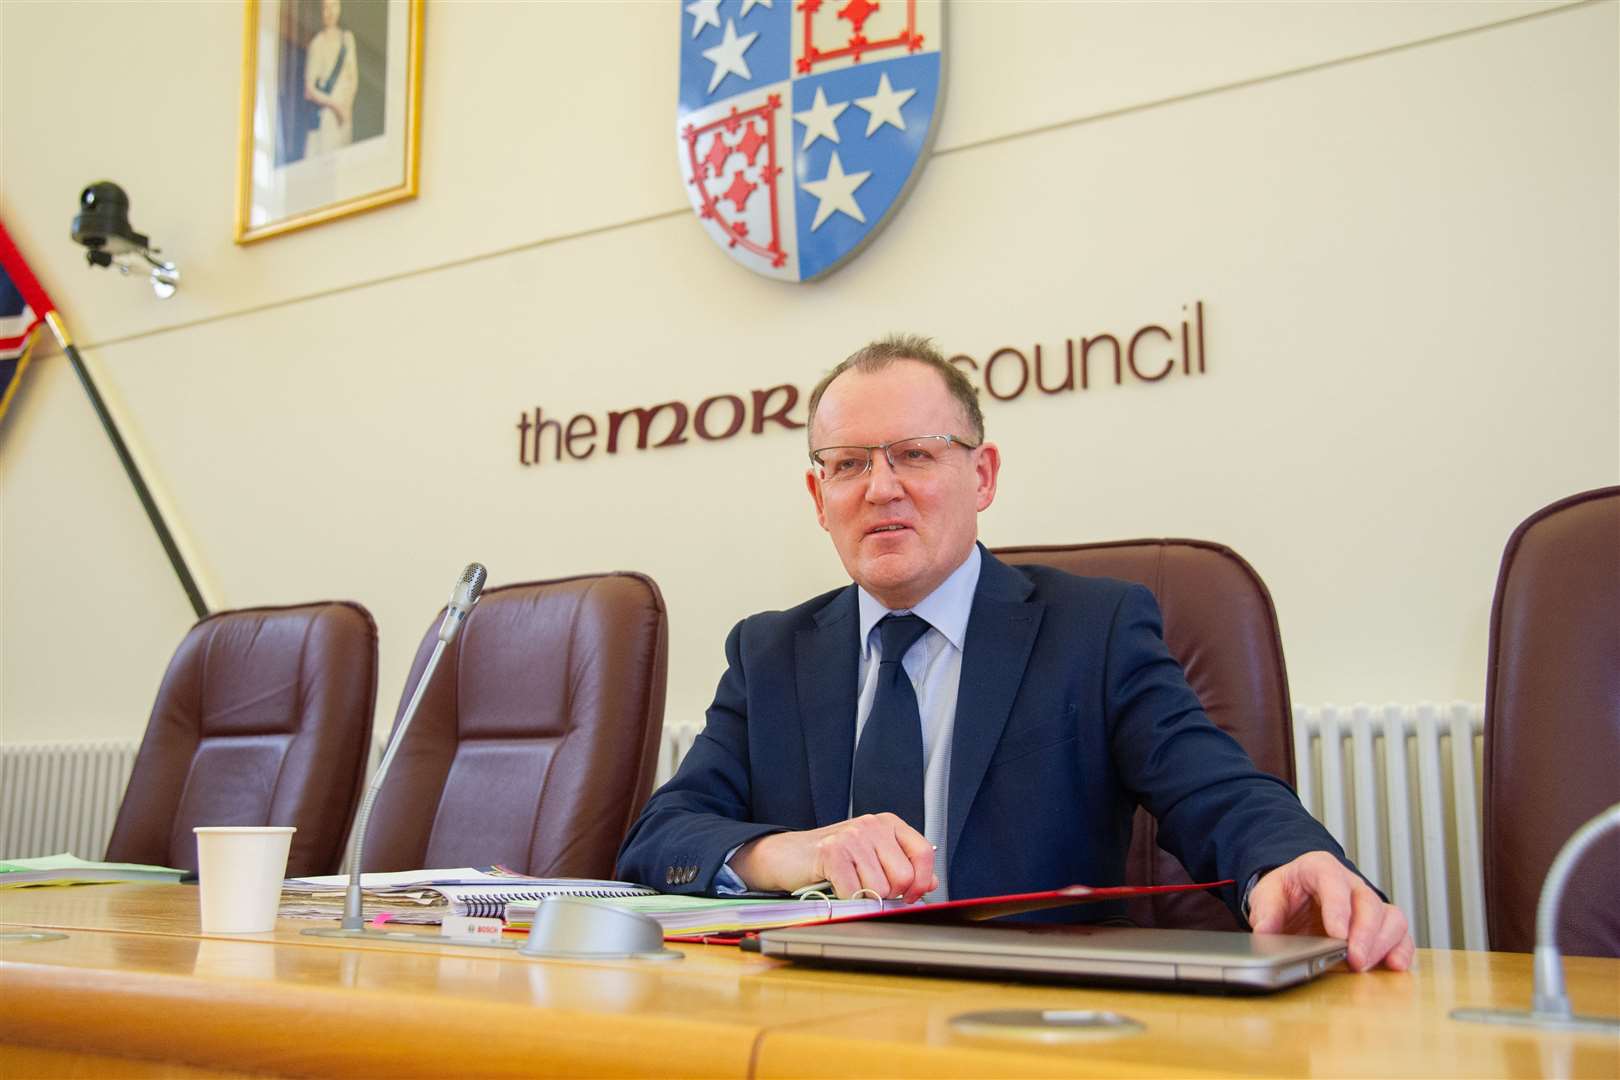 Moray Council chief executive Roddy Burns: Hope, hard work and community spirit “will see us through”